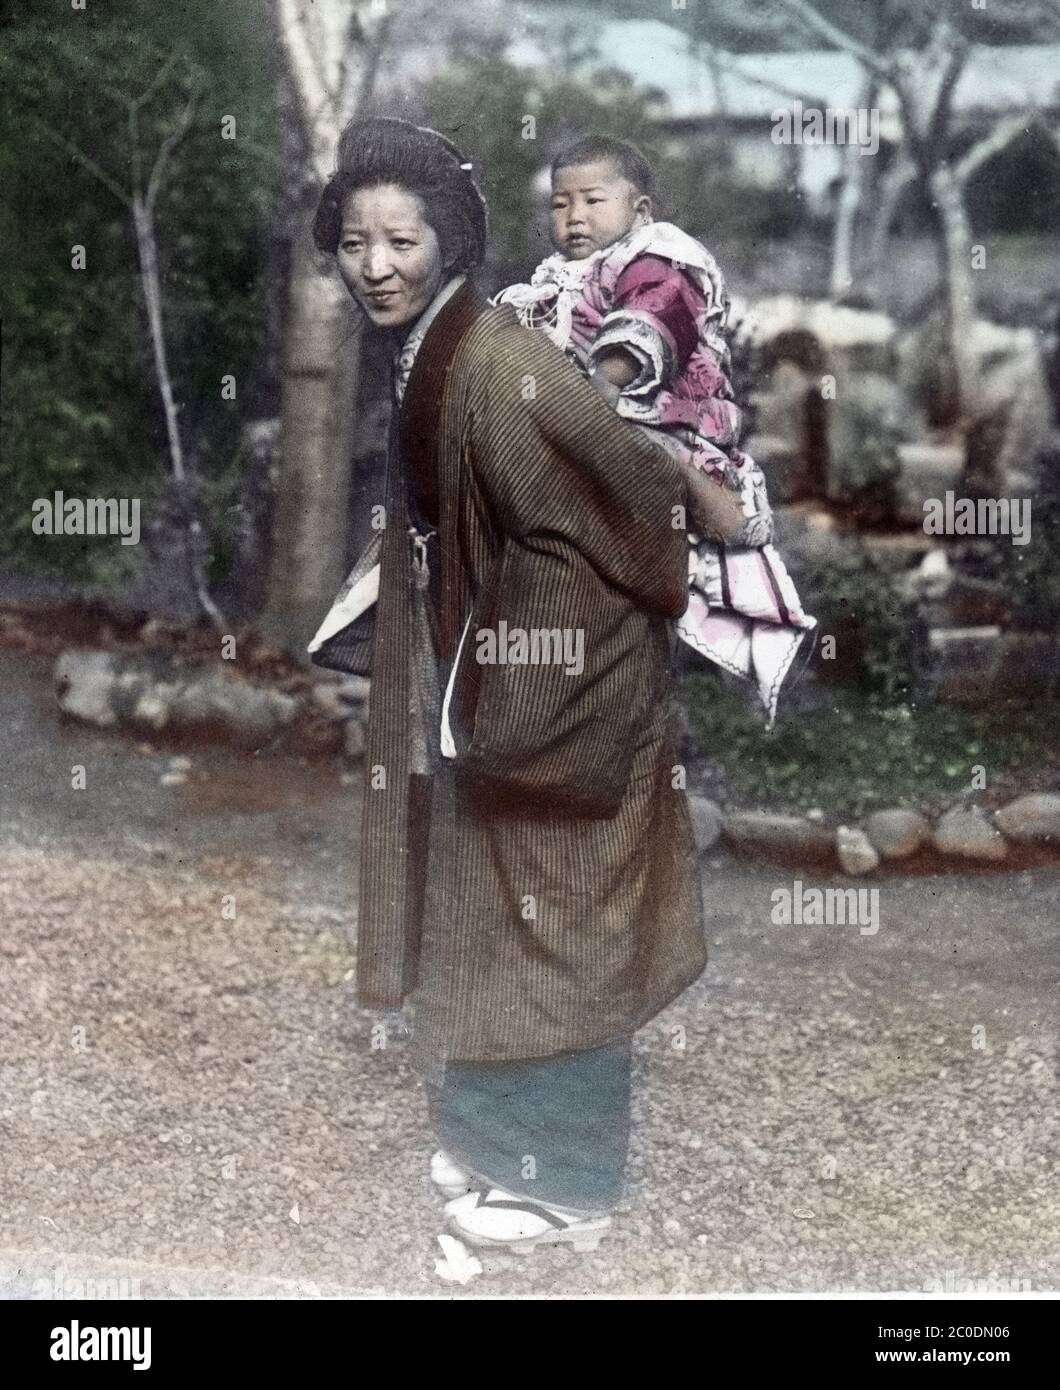 [ 1900s Japan - Japanese Mother and Child ] — A mother with her child on her back, a custom known as onbu (負んぶ).  20th century vintage glass slide. Stock Photo